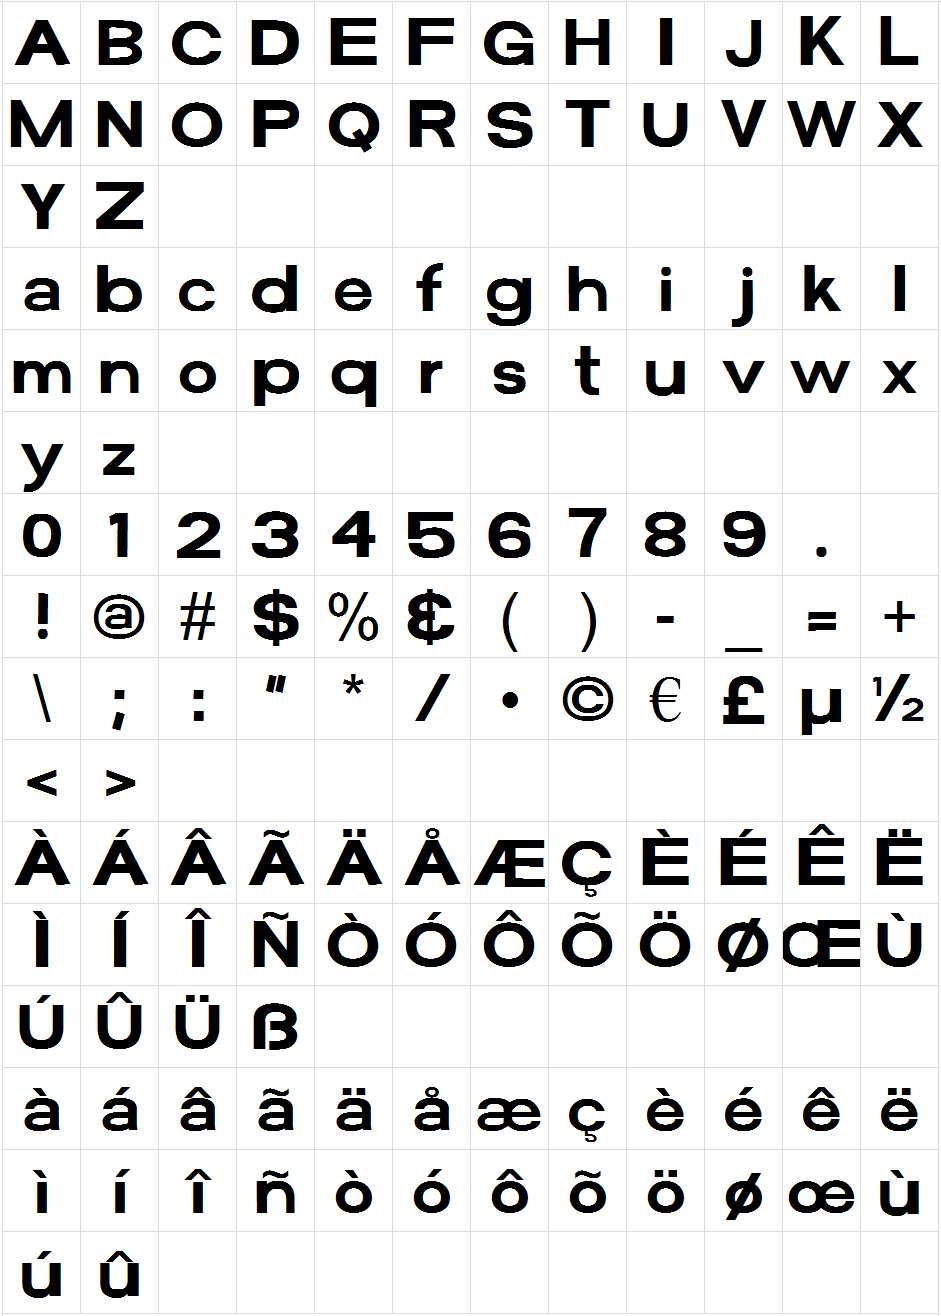 Funzone Font Free For Personal